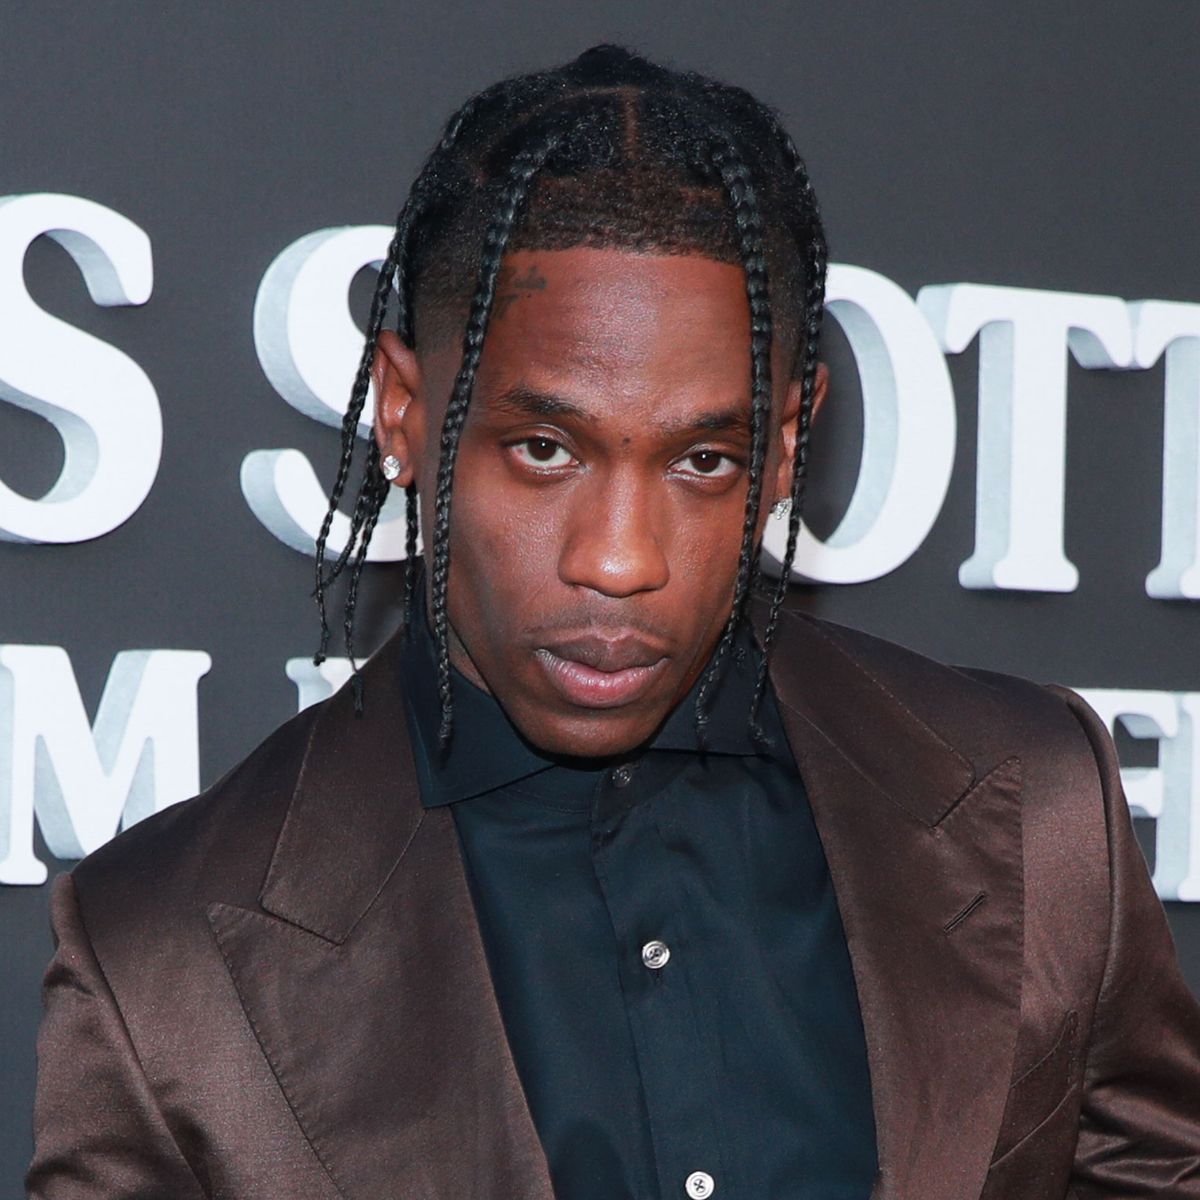 Rapper Travis Scott shot in parking lot witnesses say they were going to take a picture with him but as soon as Travis was about to leave Travis got into an argument with the guy and he pulled out a gun and shot Travis with tons of blood